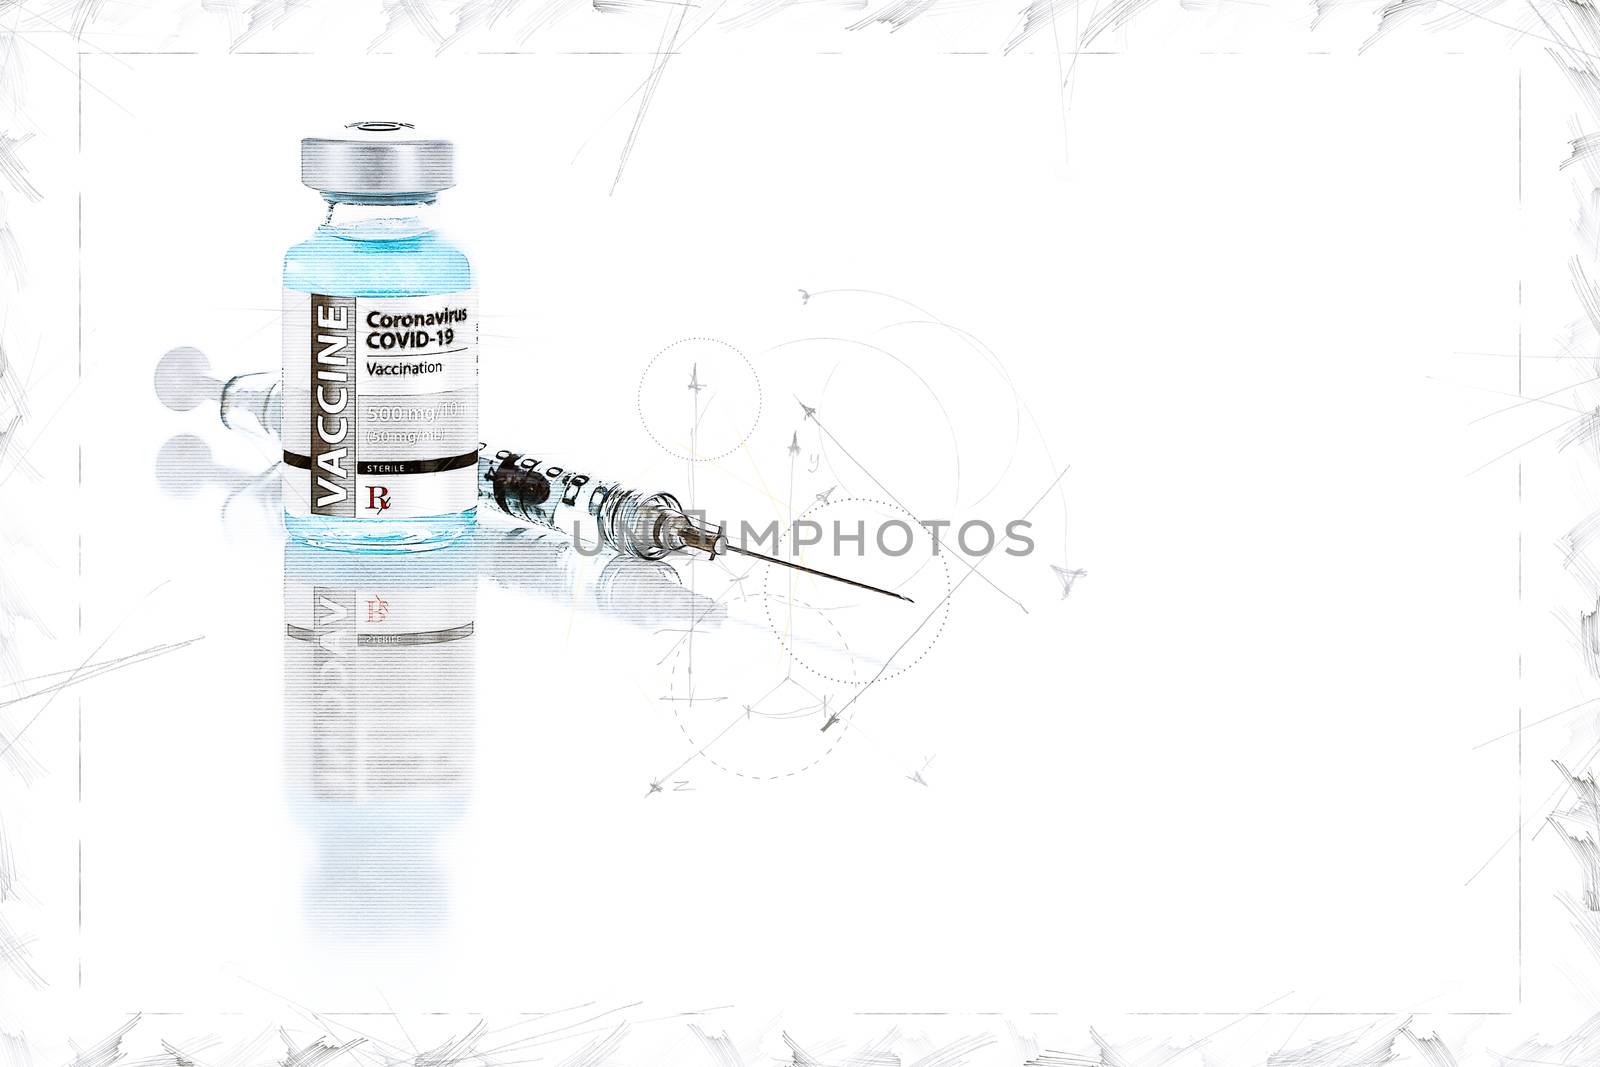 Artistic Rendering Sketch of Coronavirus COVID-19 Vaccine Vial a by Feverpitched